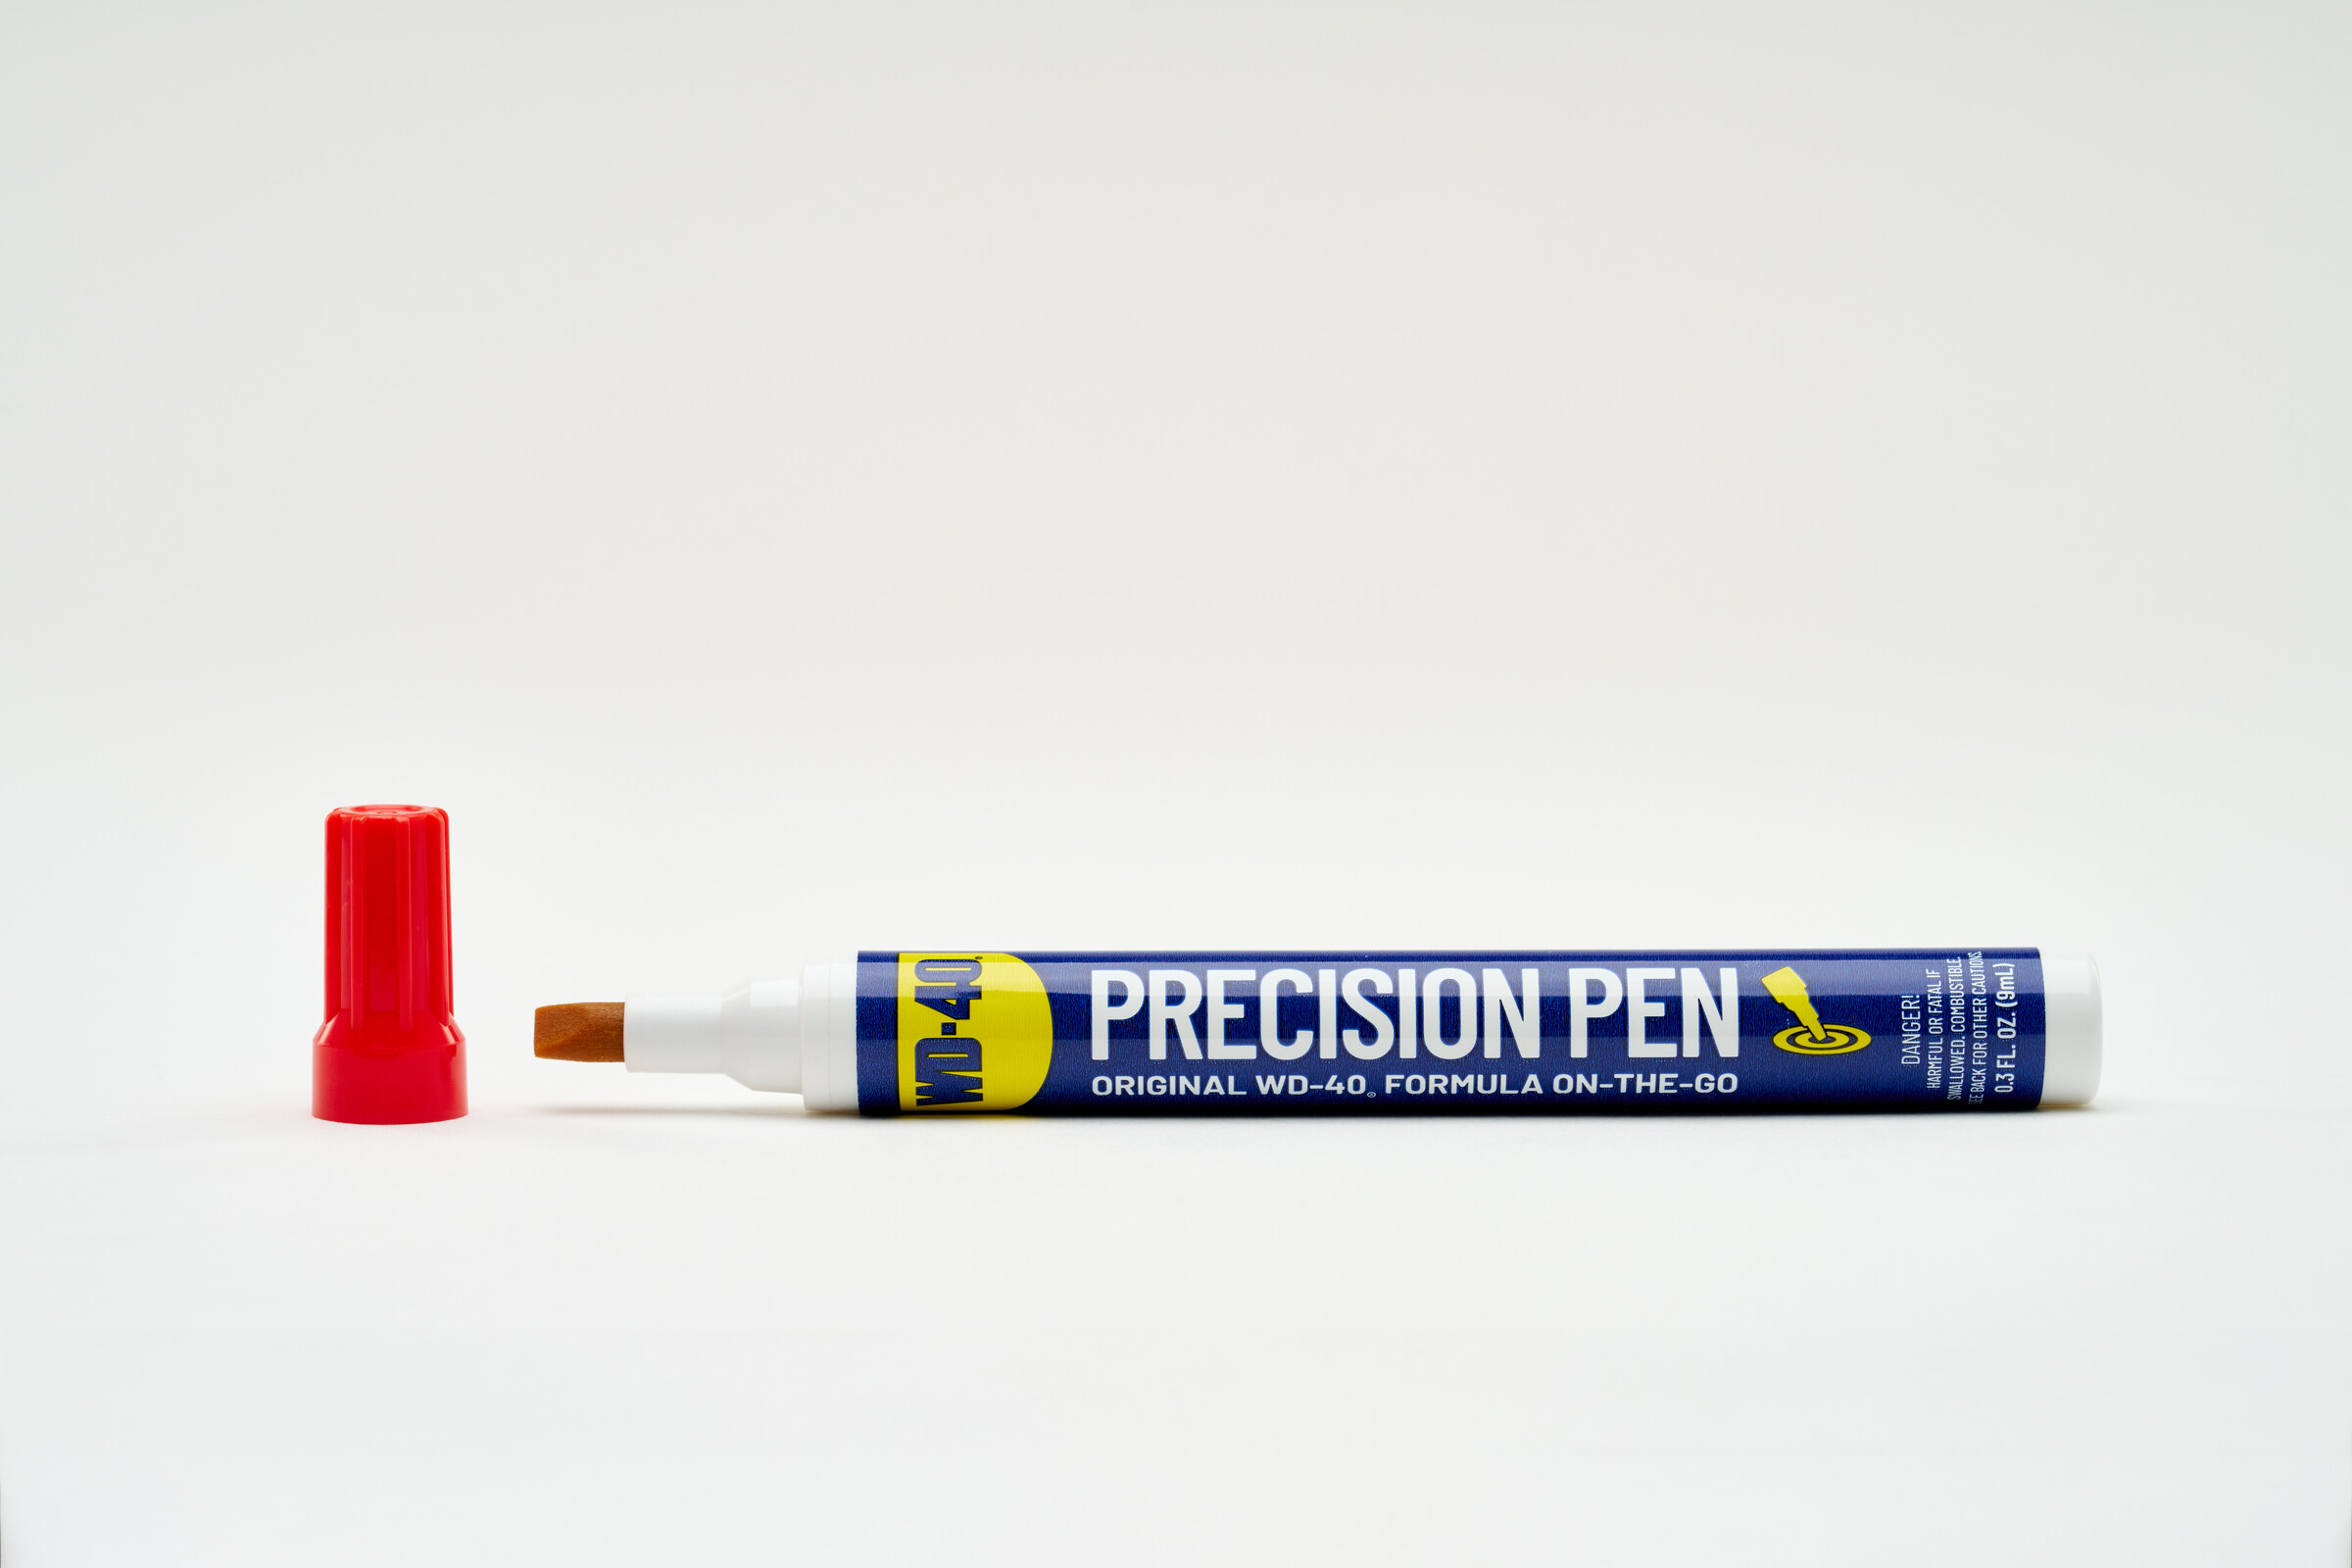 Introducing the NEW WD-40® Precision Pen: Precision in Your Pocket